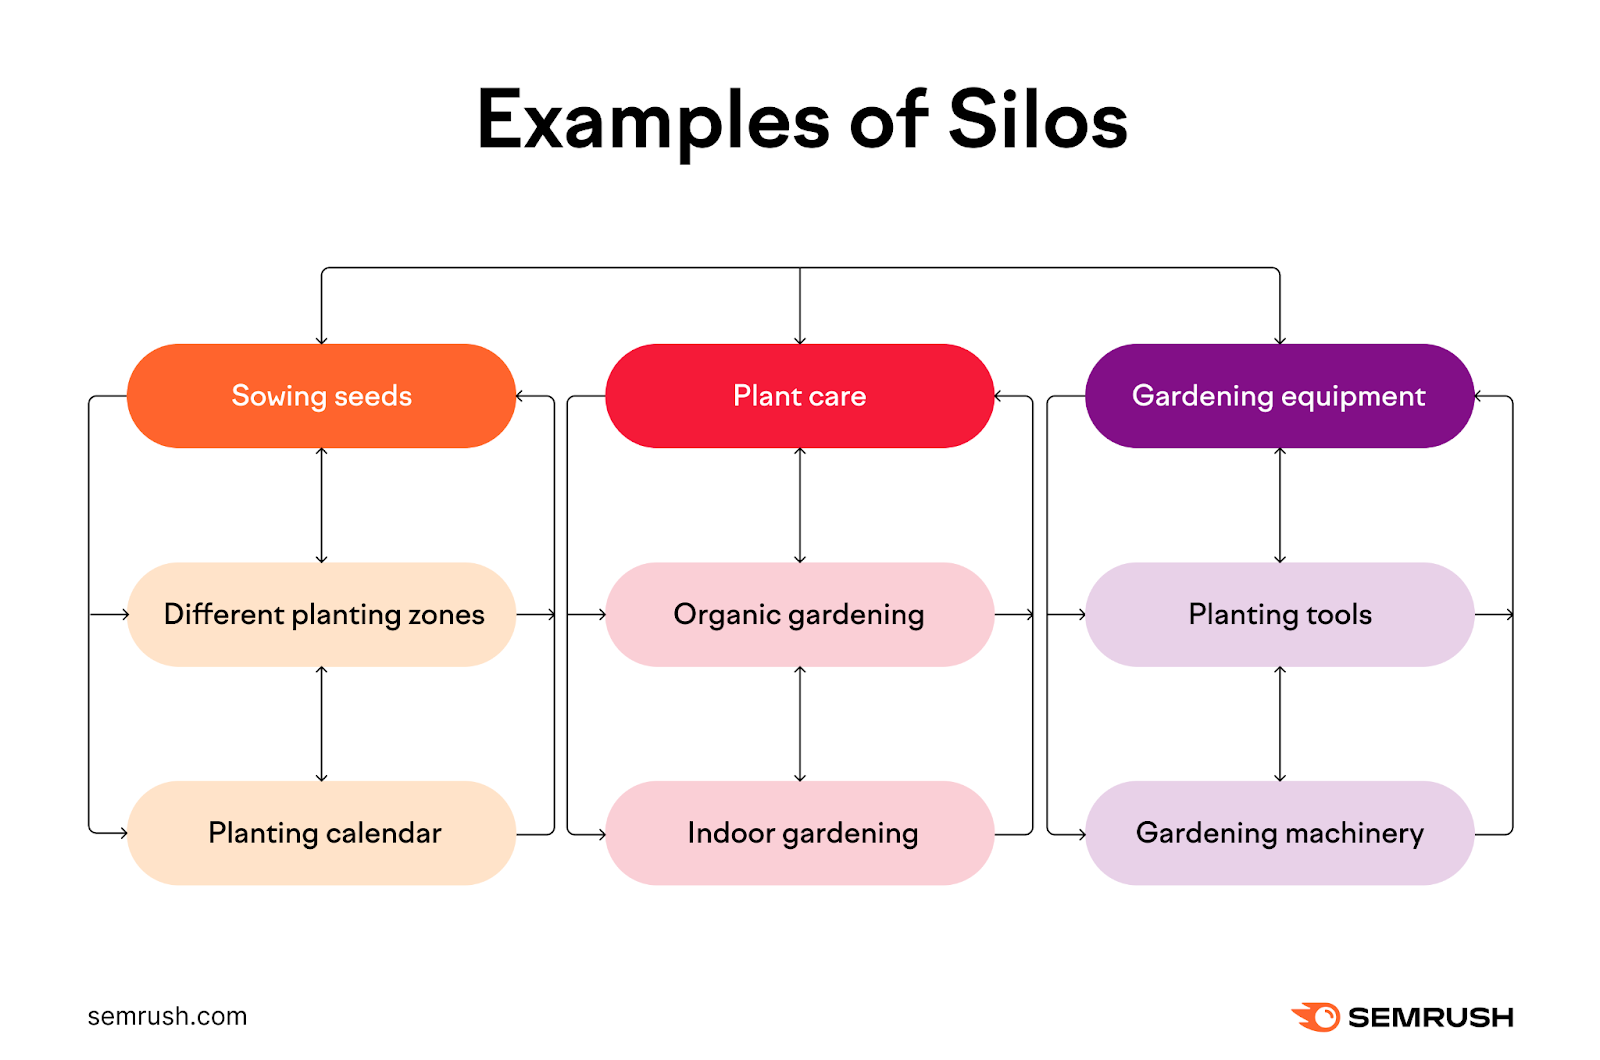 Examples of silos